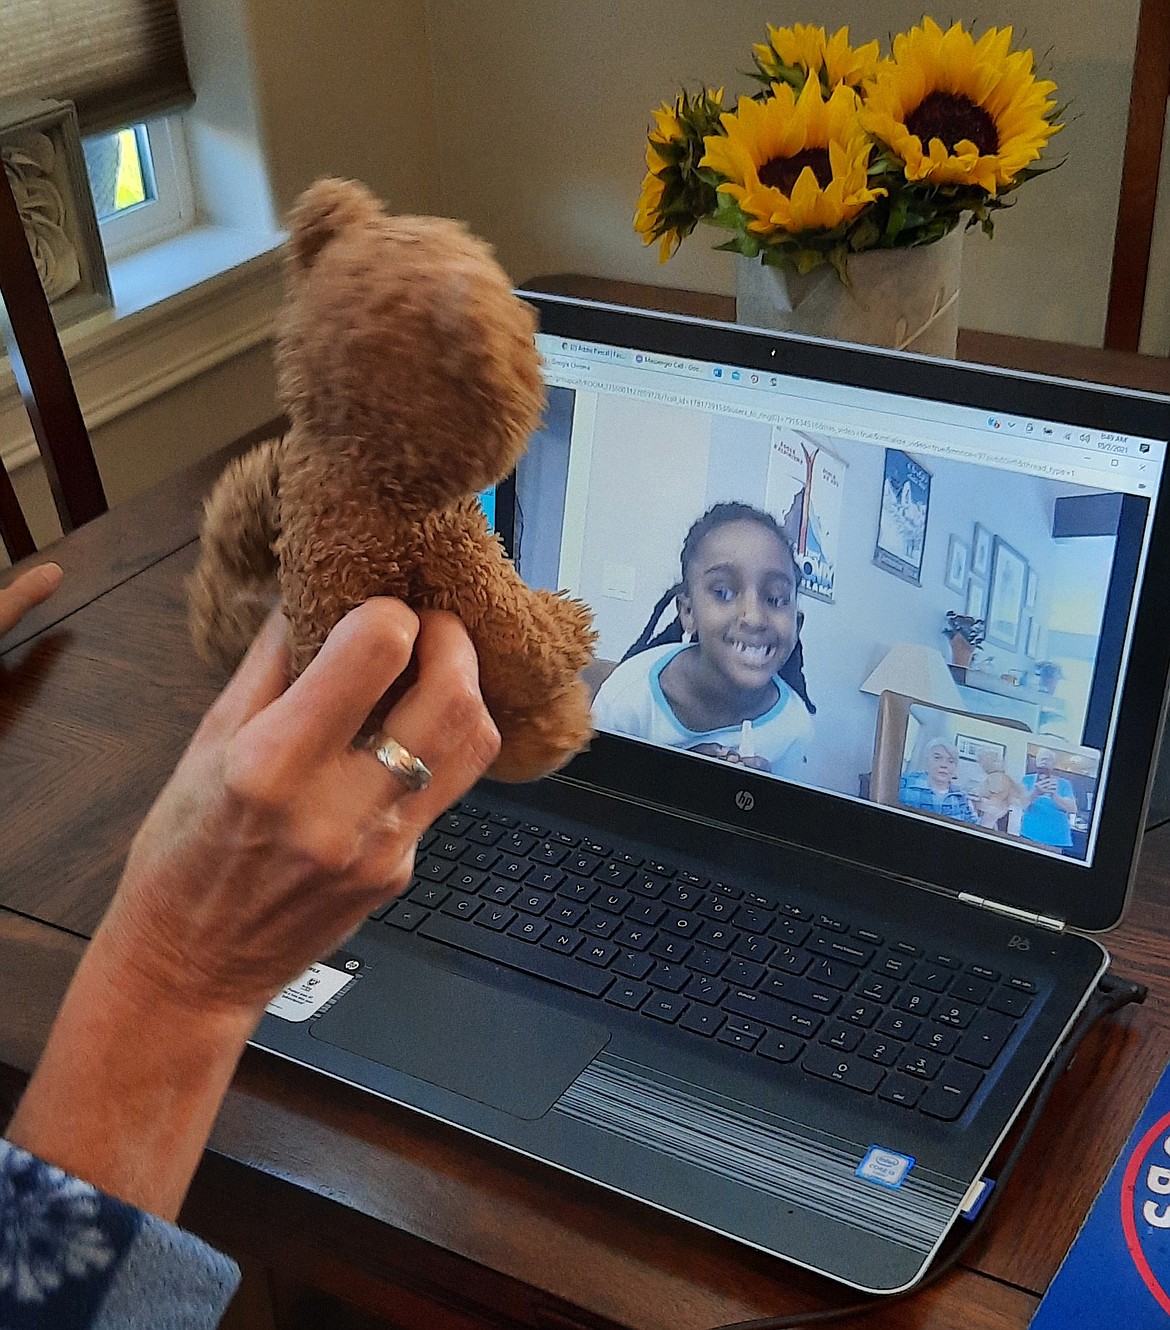 Terri Hayden delivers the news to Naomi Pascal via video call that her lost bear, Teddy, has been found. (photo provided)